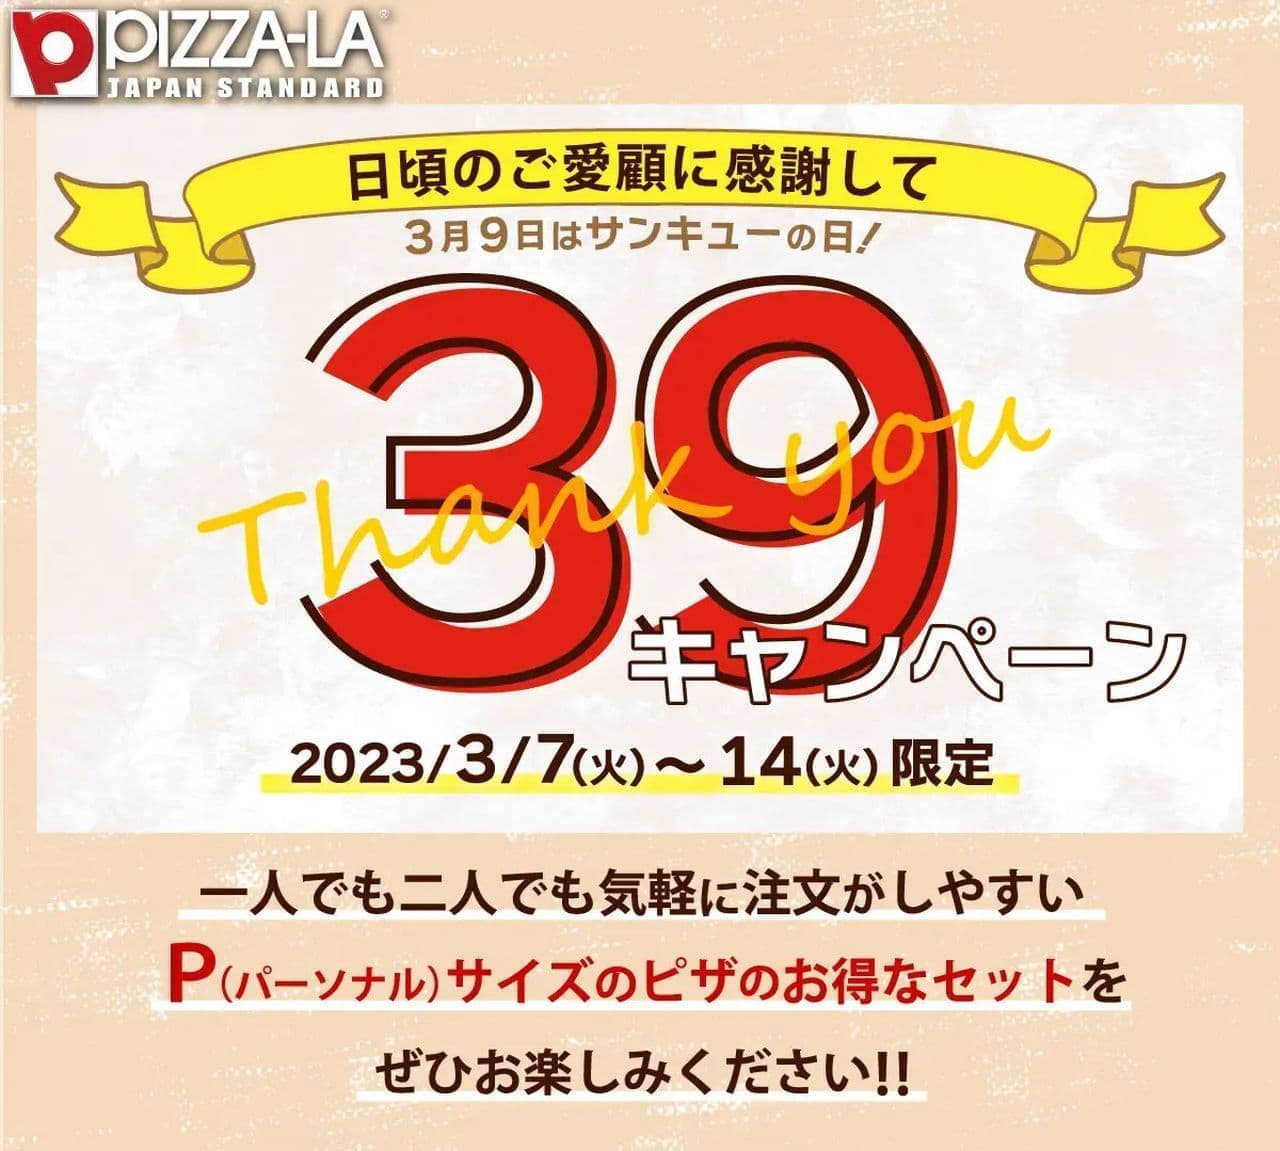 Pizza "39 (Thank You) Campaign"